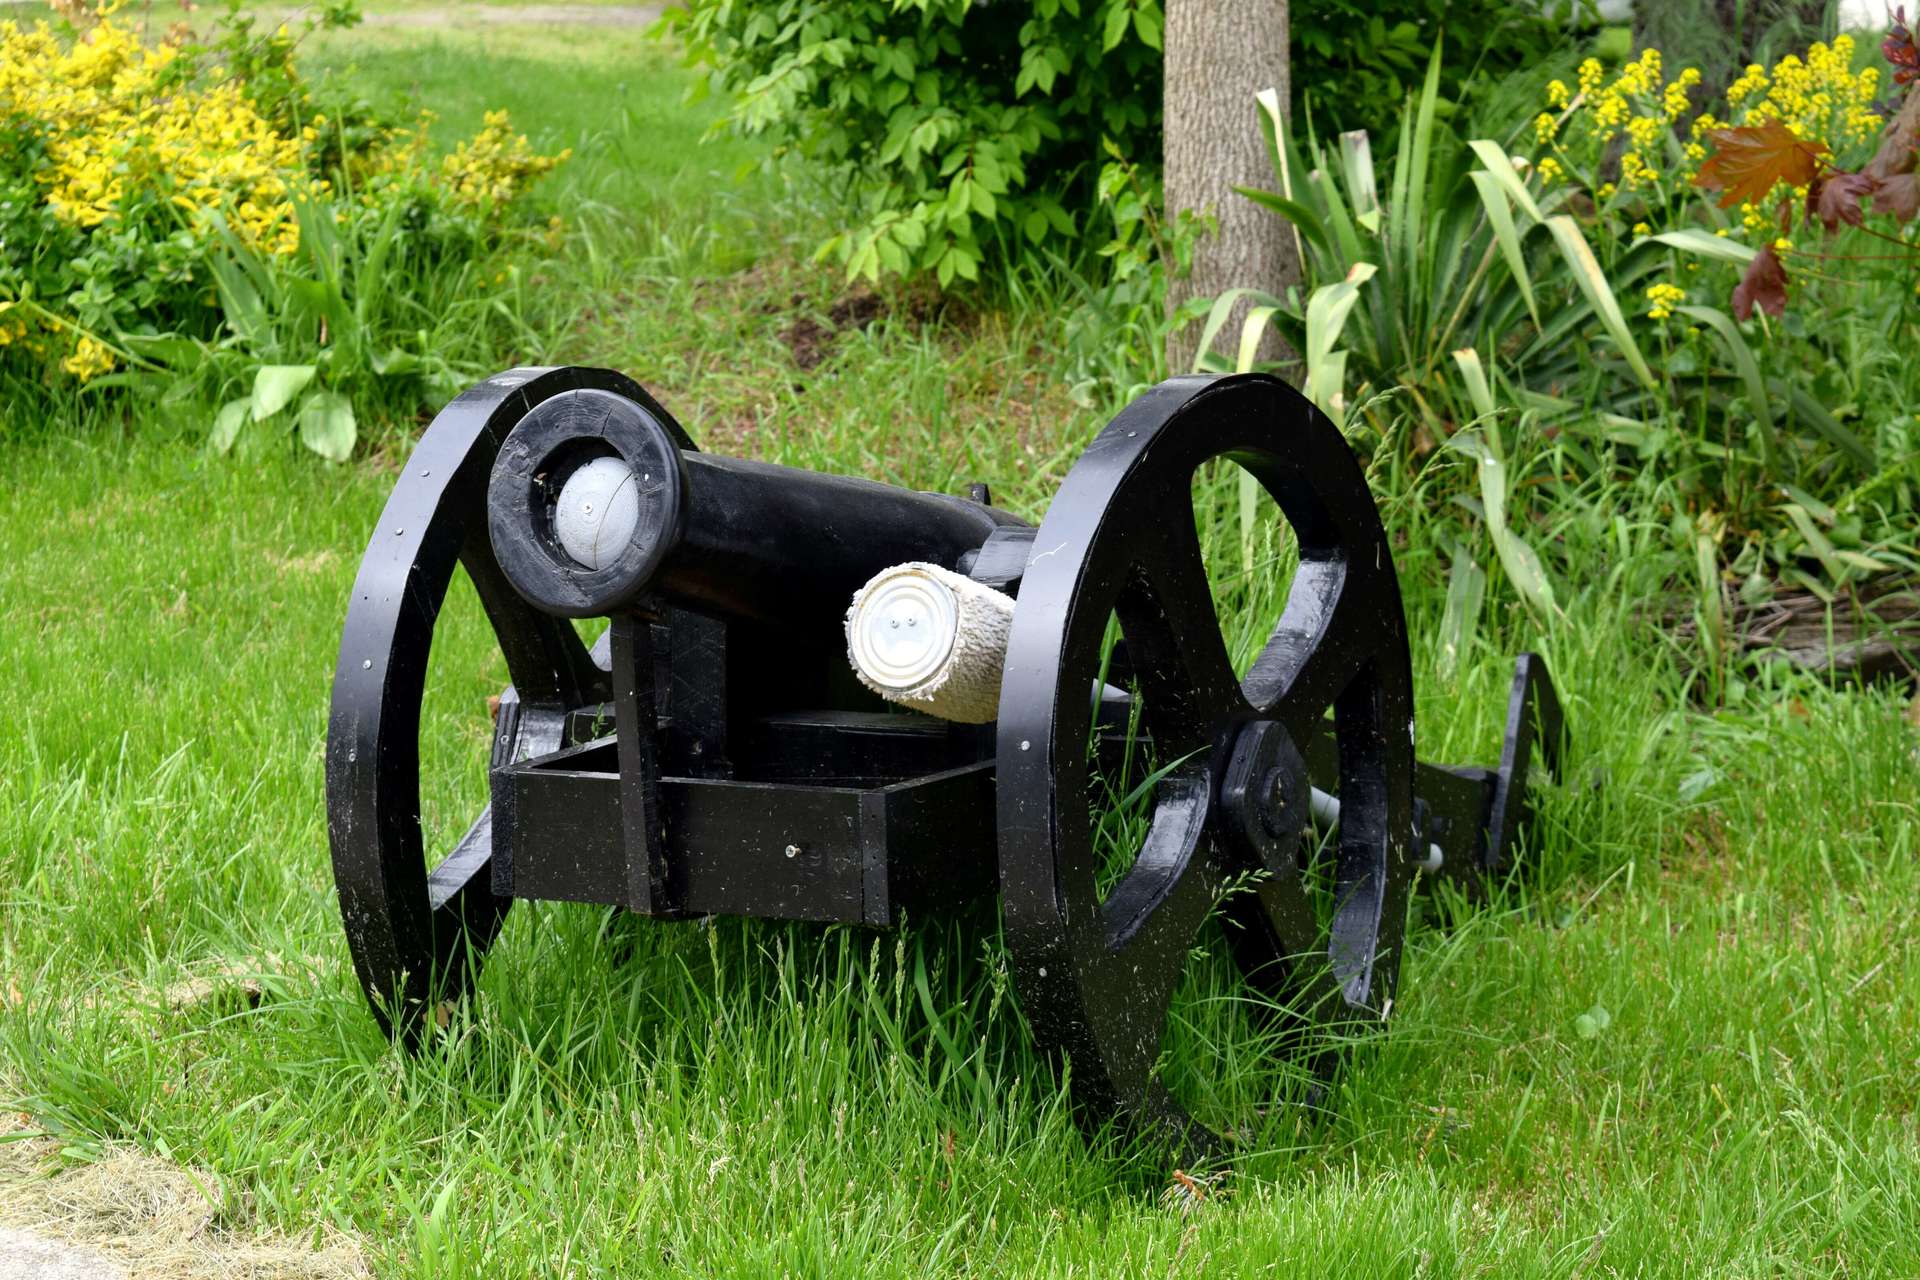 A small black cannon is sitting in the grass